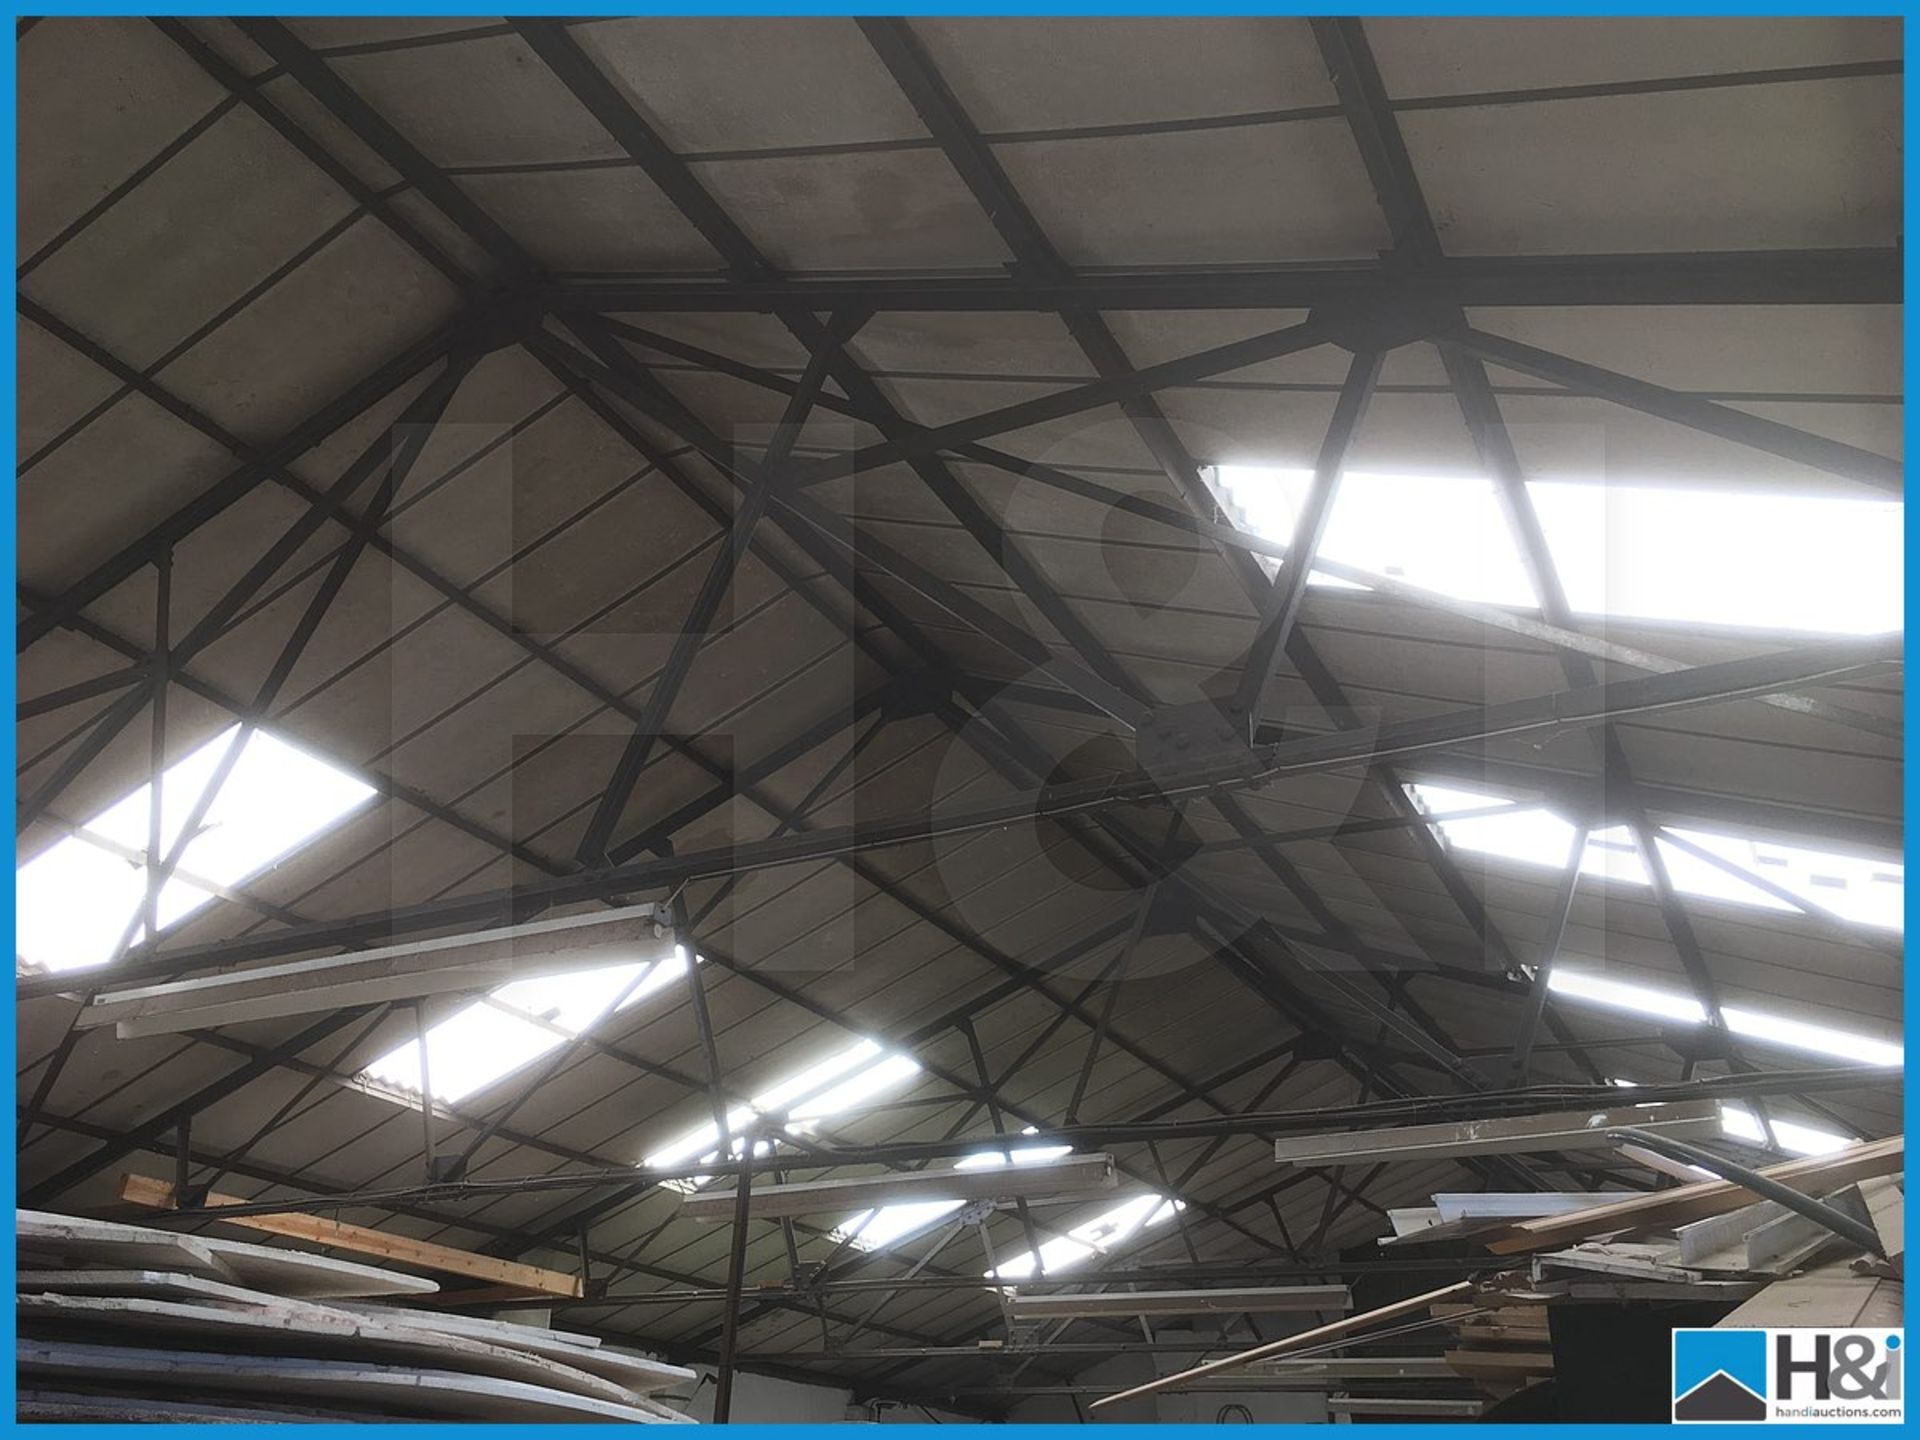 Complete building roof assembly comprising trusses and angle iron pearlings. 6 off trusses, 7 bays